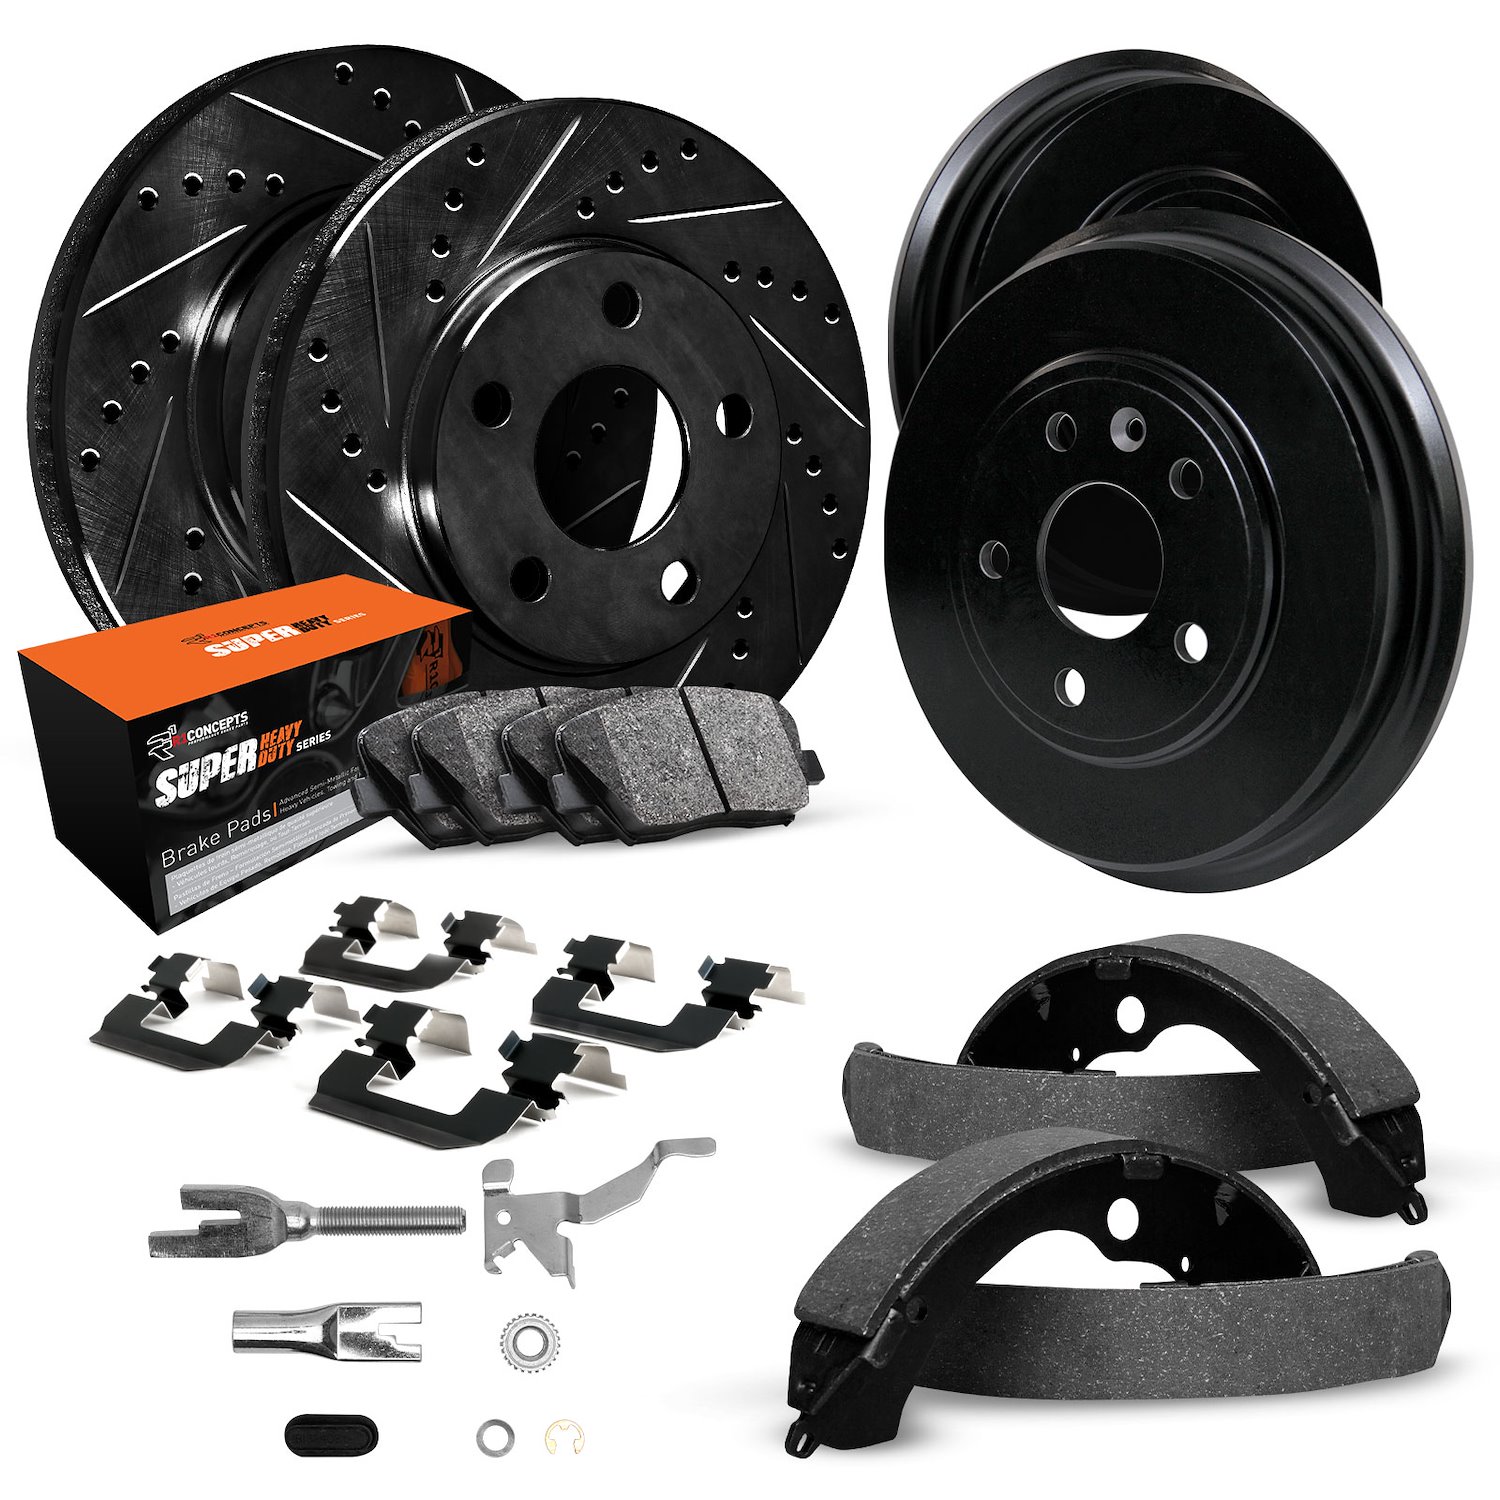 E-Line Drilled/Slotted Black Rotor & Drum Set w/Super-Duty Pads, Shoes, Hardware/Adjusters, 1974-1974 Ford/Lincoln/Mercury/Mazda